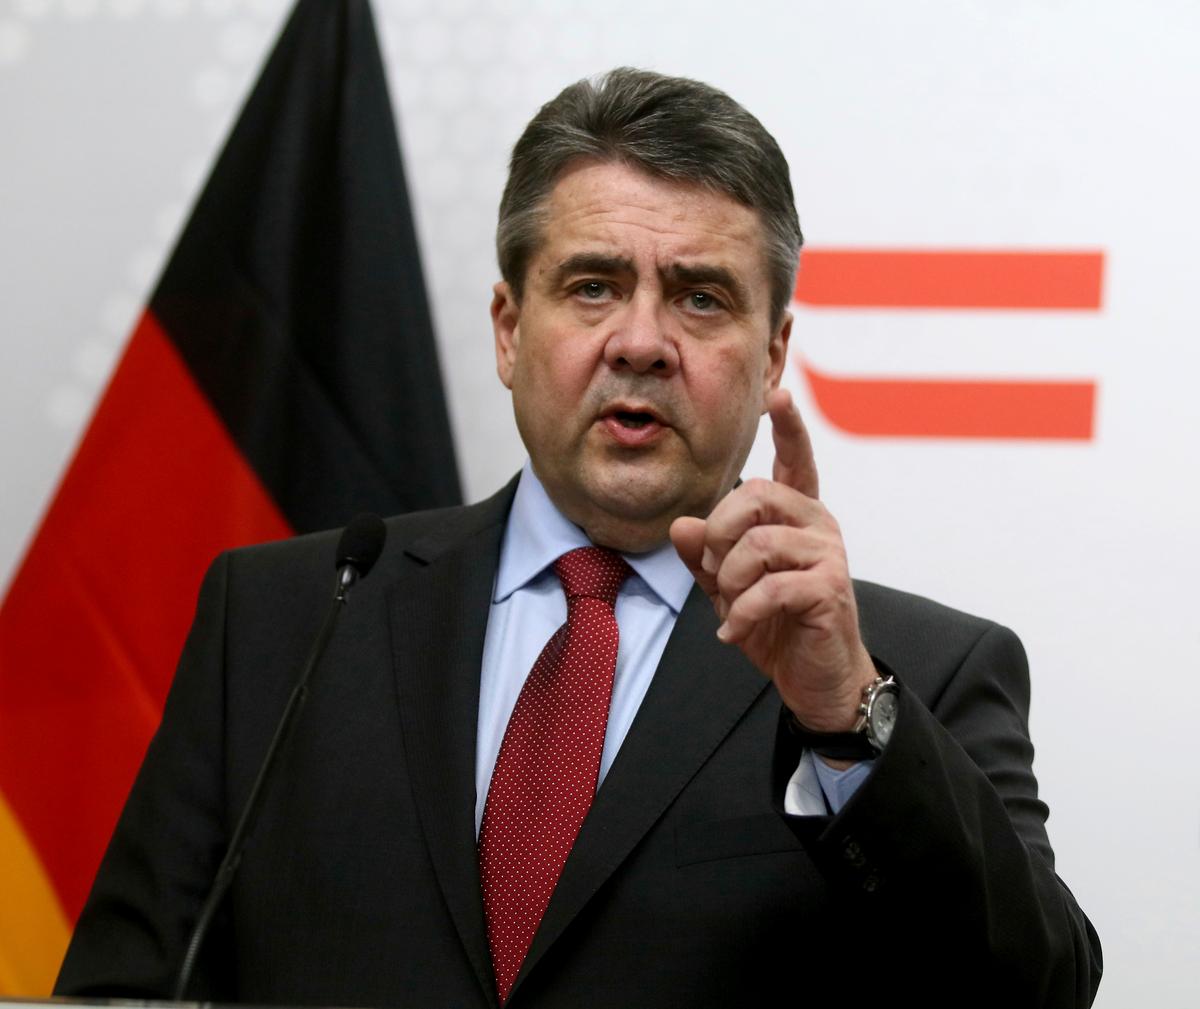 German Minister of Foreign Affairs Sigmar Gabriel addresses the media after a meeting with Austrian Foreign Minister Sebastian Kurz at the foreign ministry in Vienna, Austria on Feb. 27, 2017. (AP Photo/Ronald Zak)